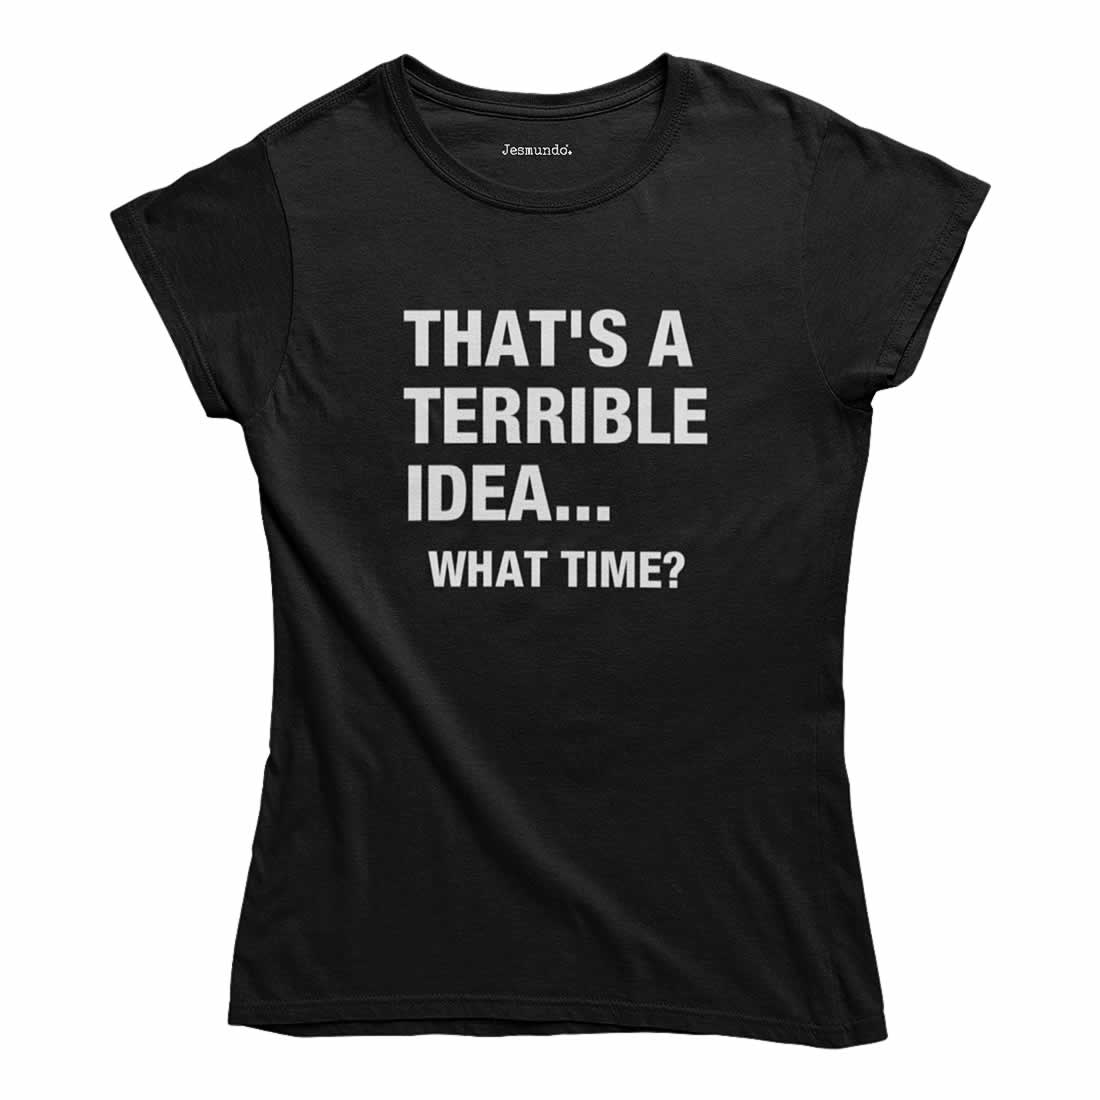 That's a terrible idea what time t-shirt